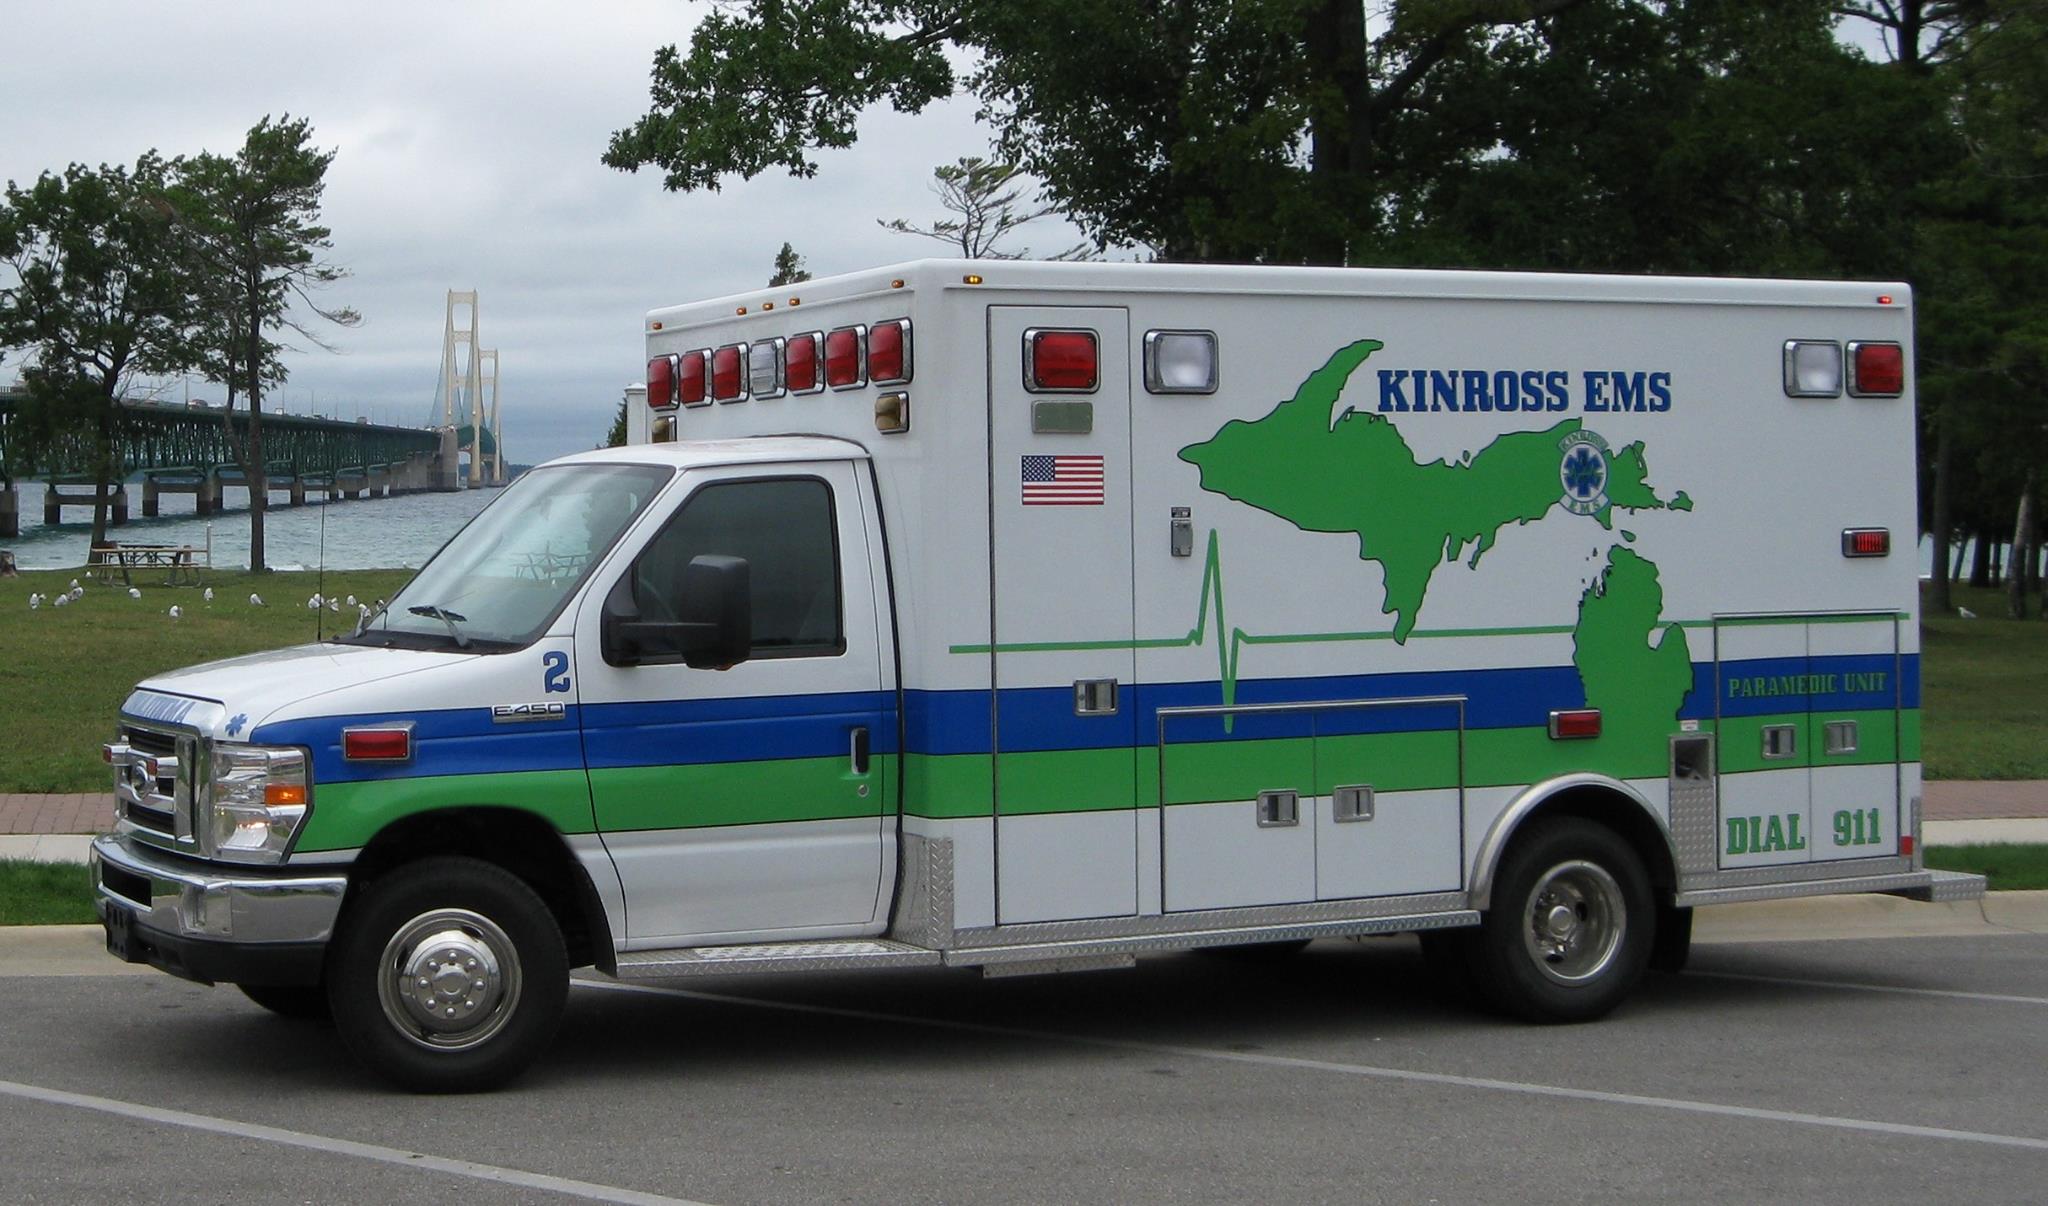 An image of one of our EMS trucks.